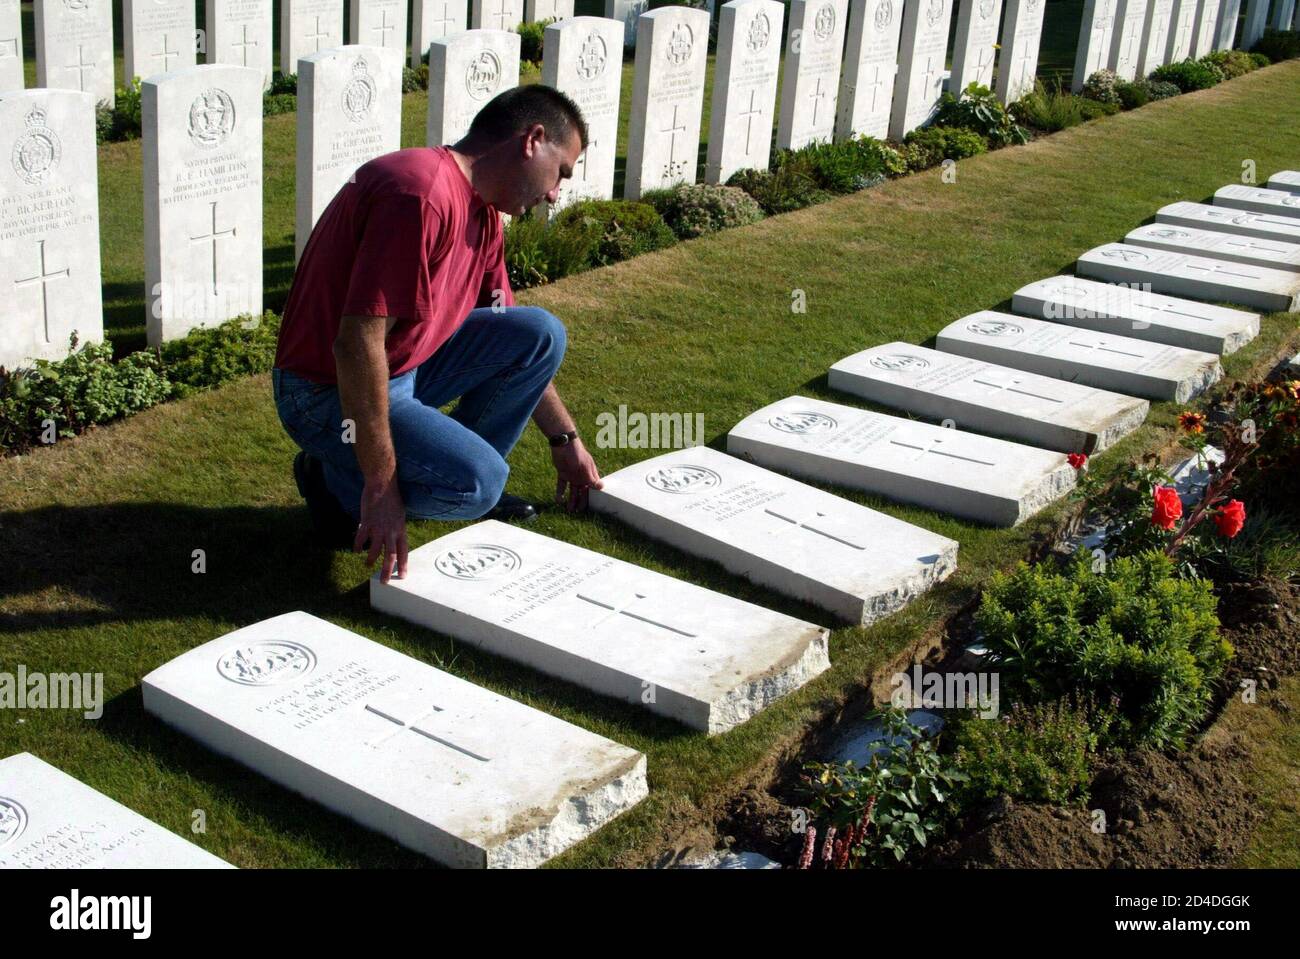 A Commonwealth war graves commission worker repairs one of 45 grave markers, July 29, 2003, after they were desecrated during the night of July 28, 2003 at a World War one cemetery in Saint Aubert, northern France.  Intruders have vandalised dozens of graves at Saint Aubert cemetery in the north of France where the bodies of British Commonwealth troops who fought in World War One lie buried. Stock Photo